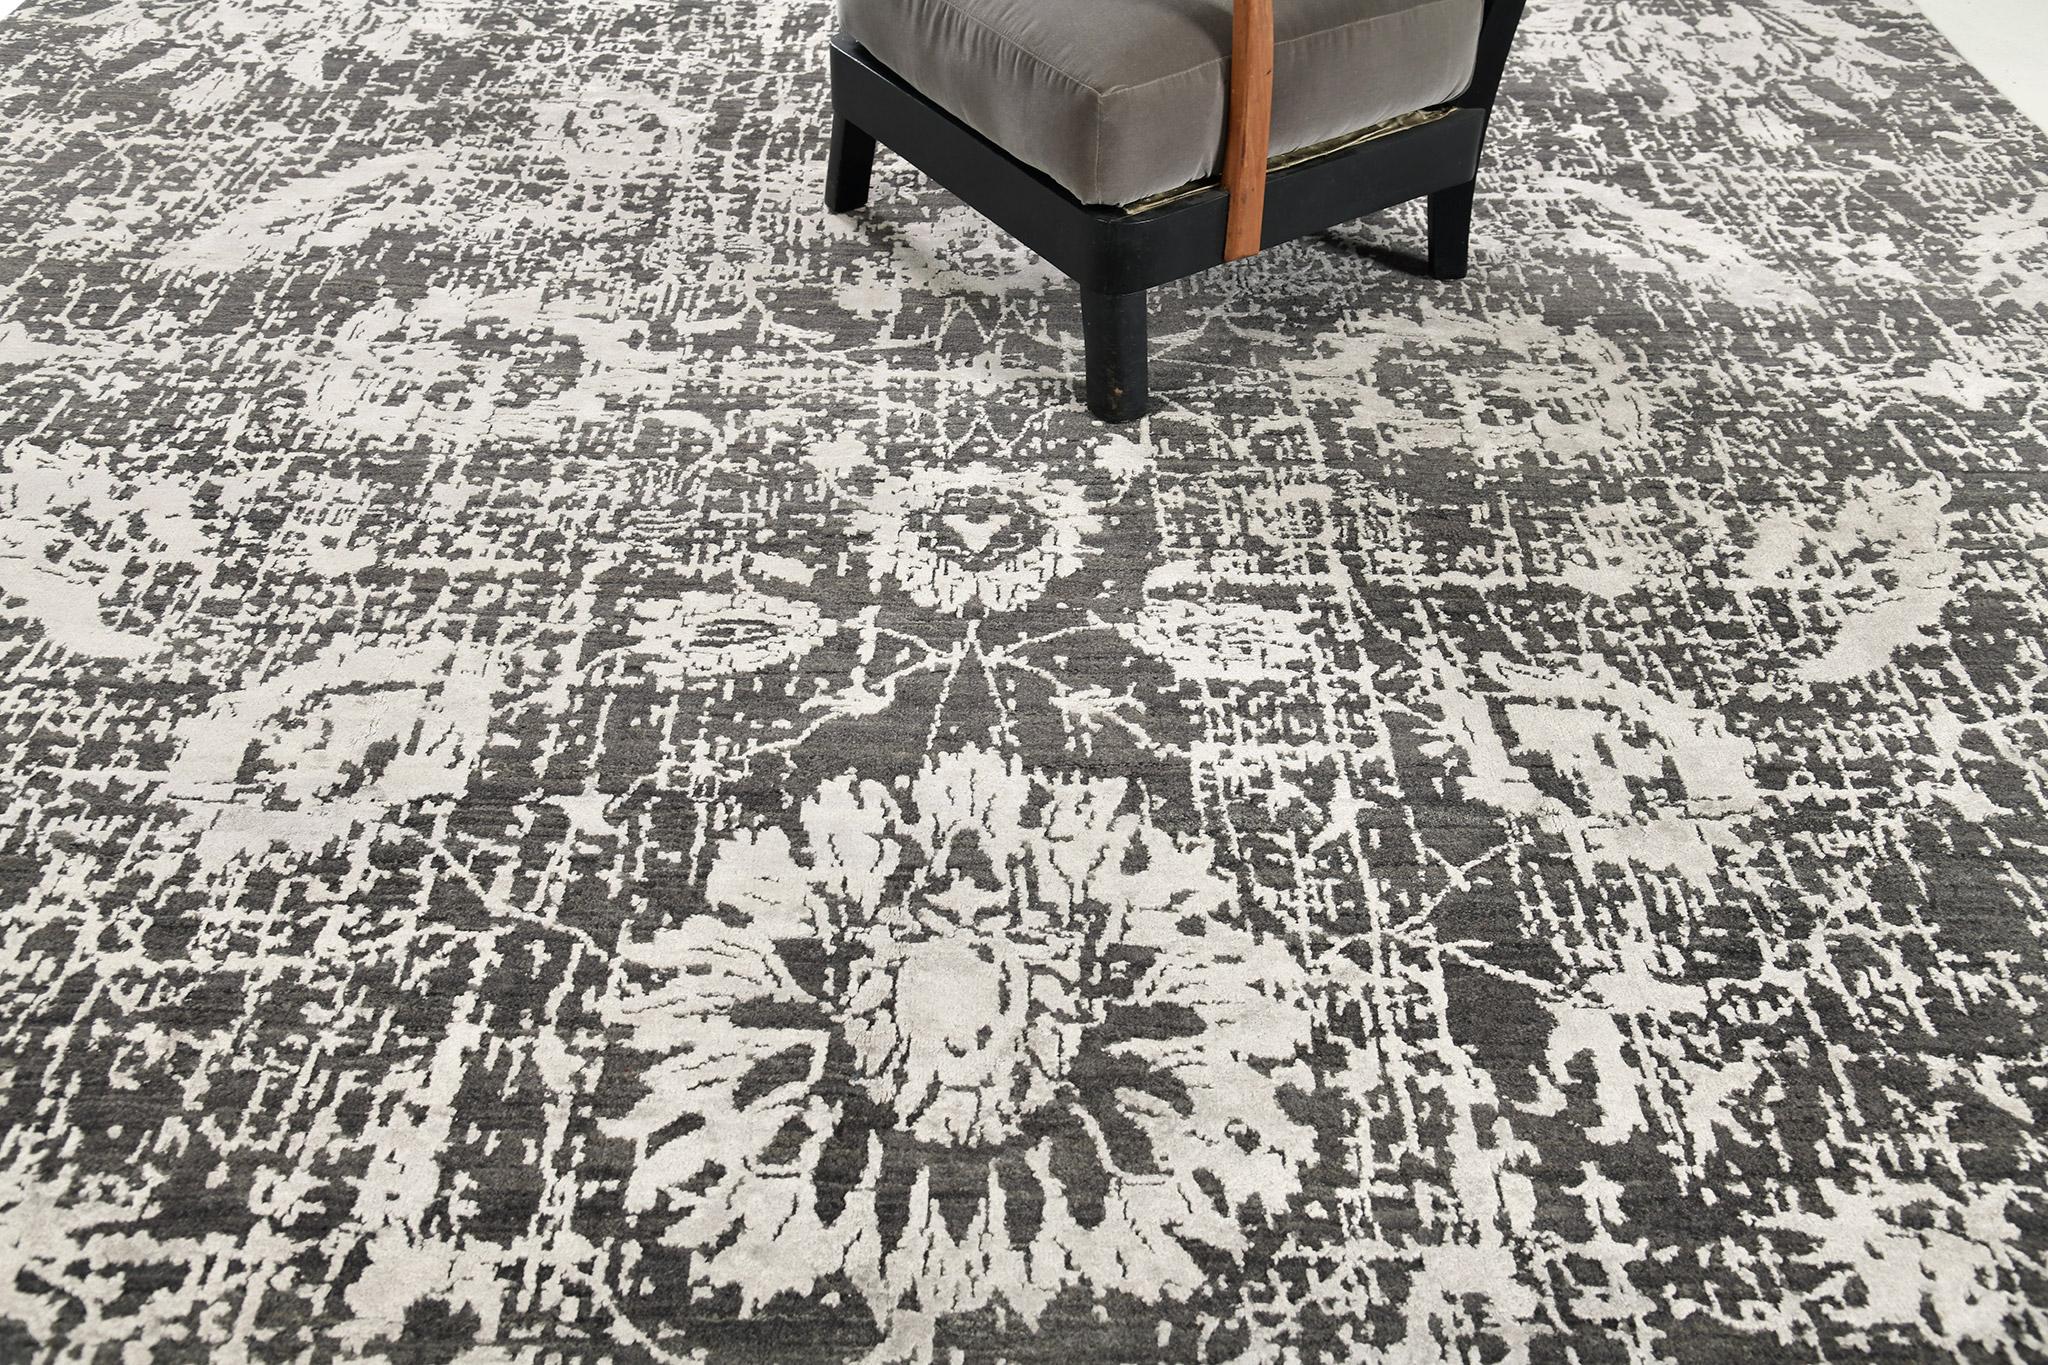 Mezzo is a wool and silk rug in transitional abstract of definitive flowers and vines over amazing tones of all shades of gray. A masterpiece that balances quality with contemporary and modern spaces. A timeless design that is surely a great hit for